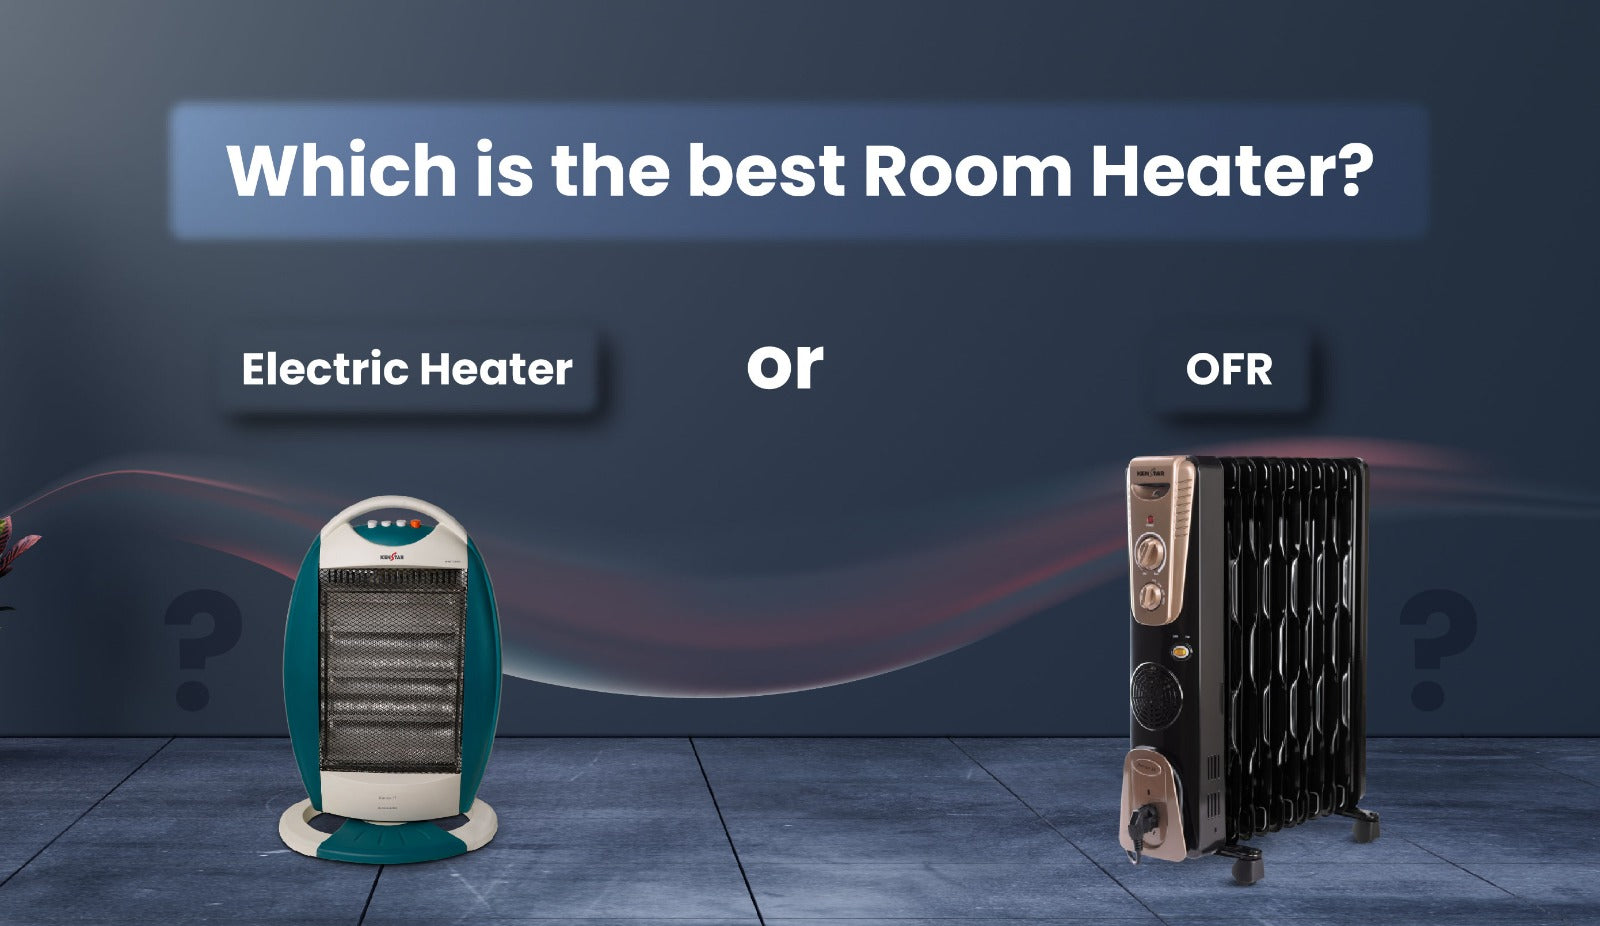 WHICH IS THE BEST ROOM HEATER: OFR OR ELECTRIC HEATER?